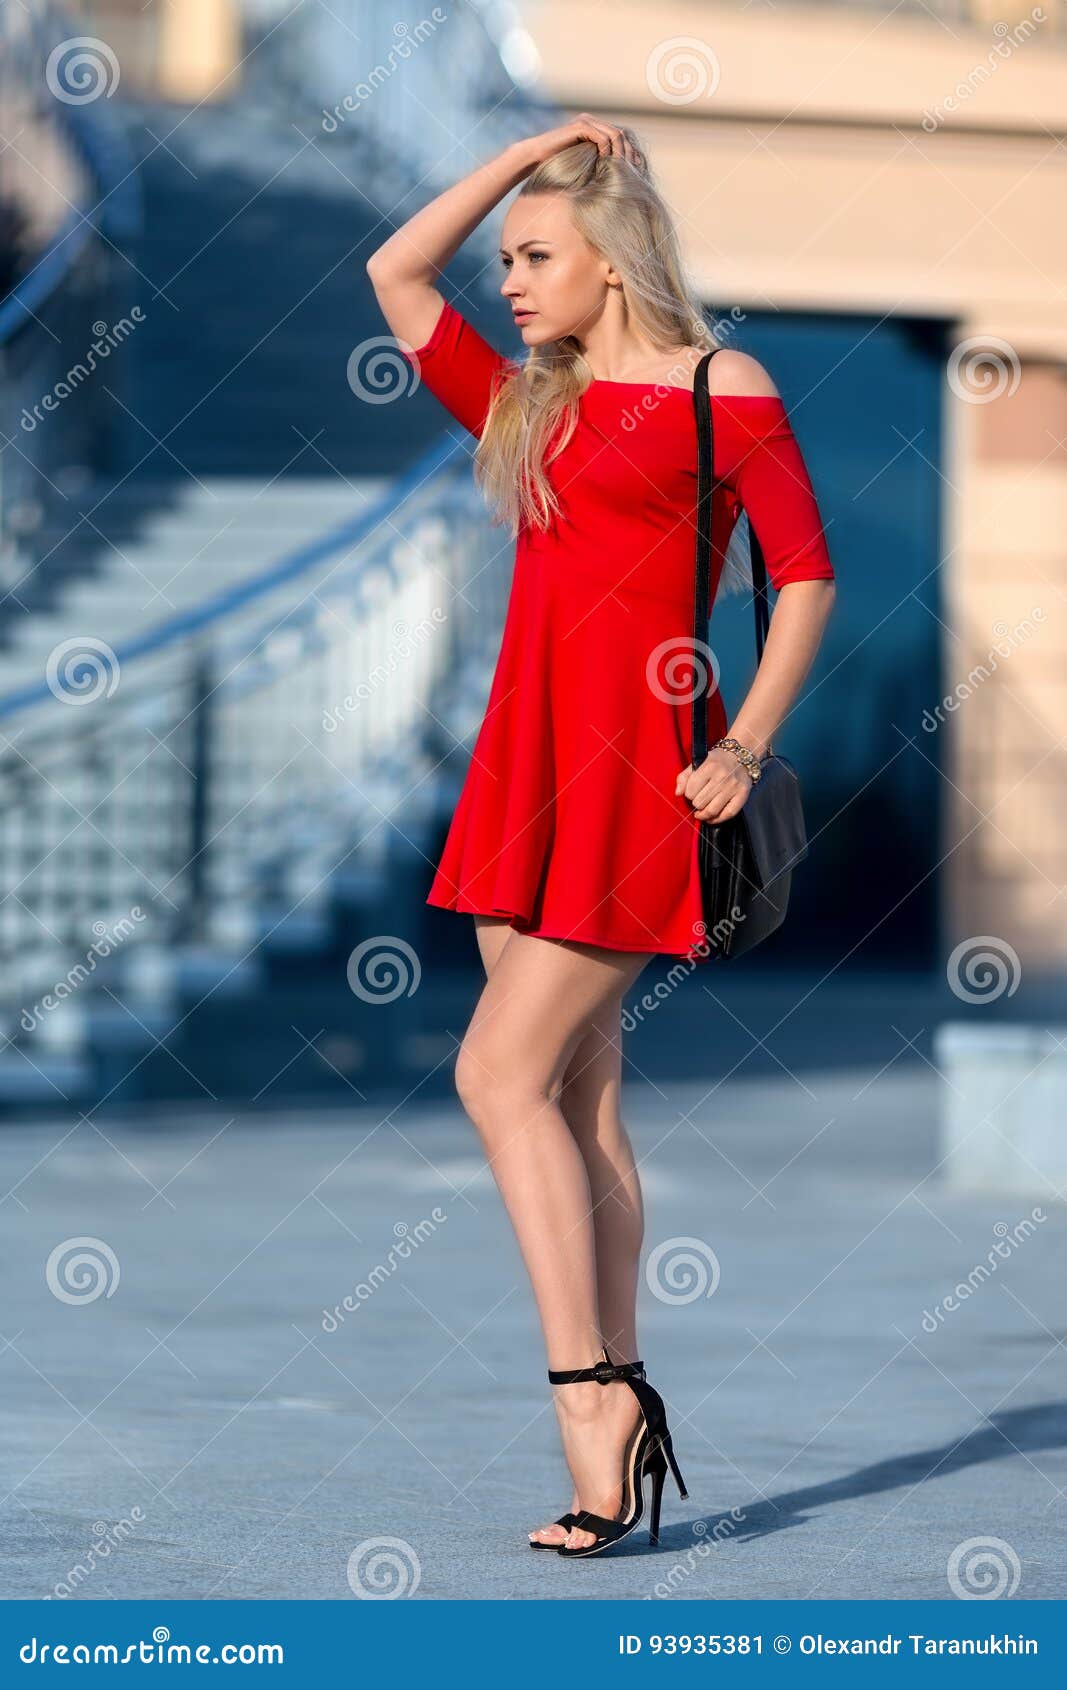 Beat The Heat - Buy Solids Red Dresses, Gold Sandals with Blue Heels  Scrapbook Look by pravalika